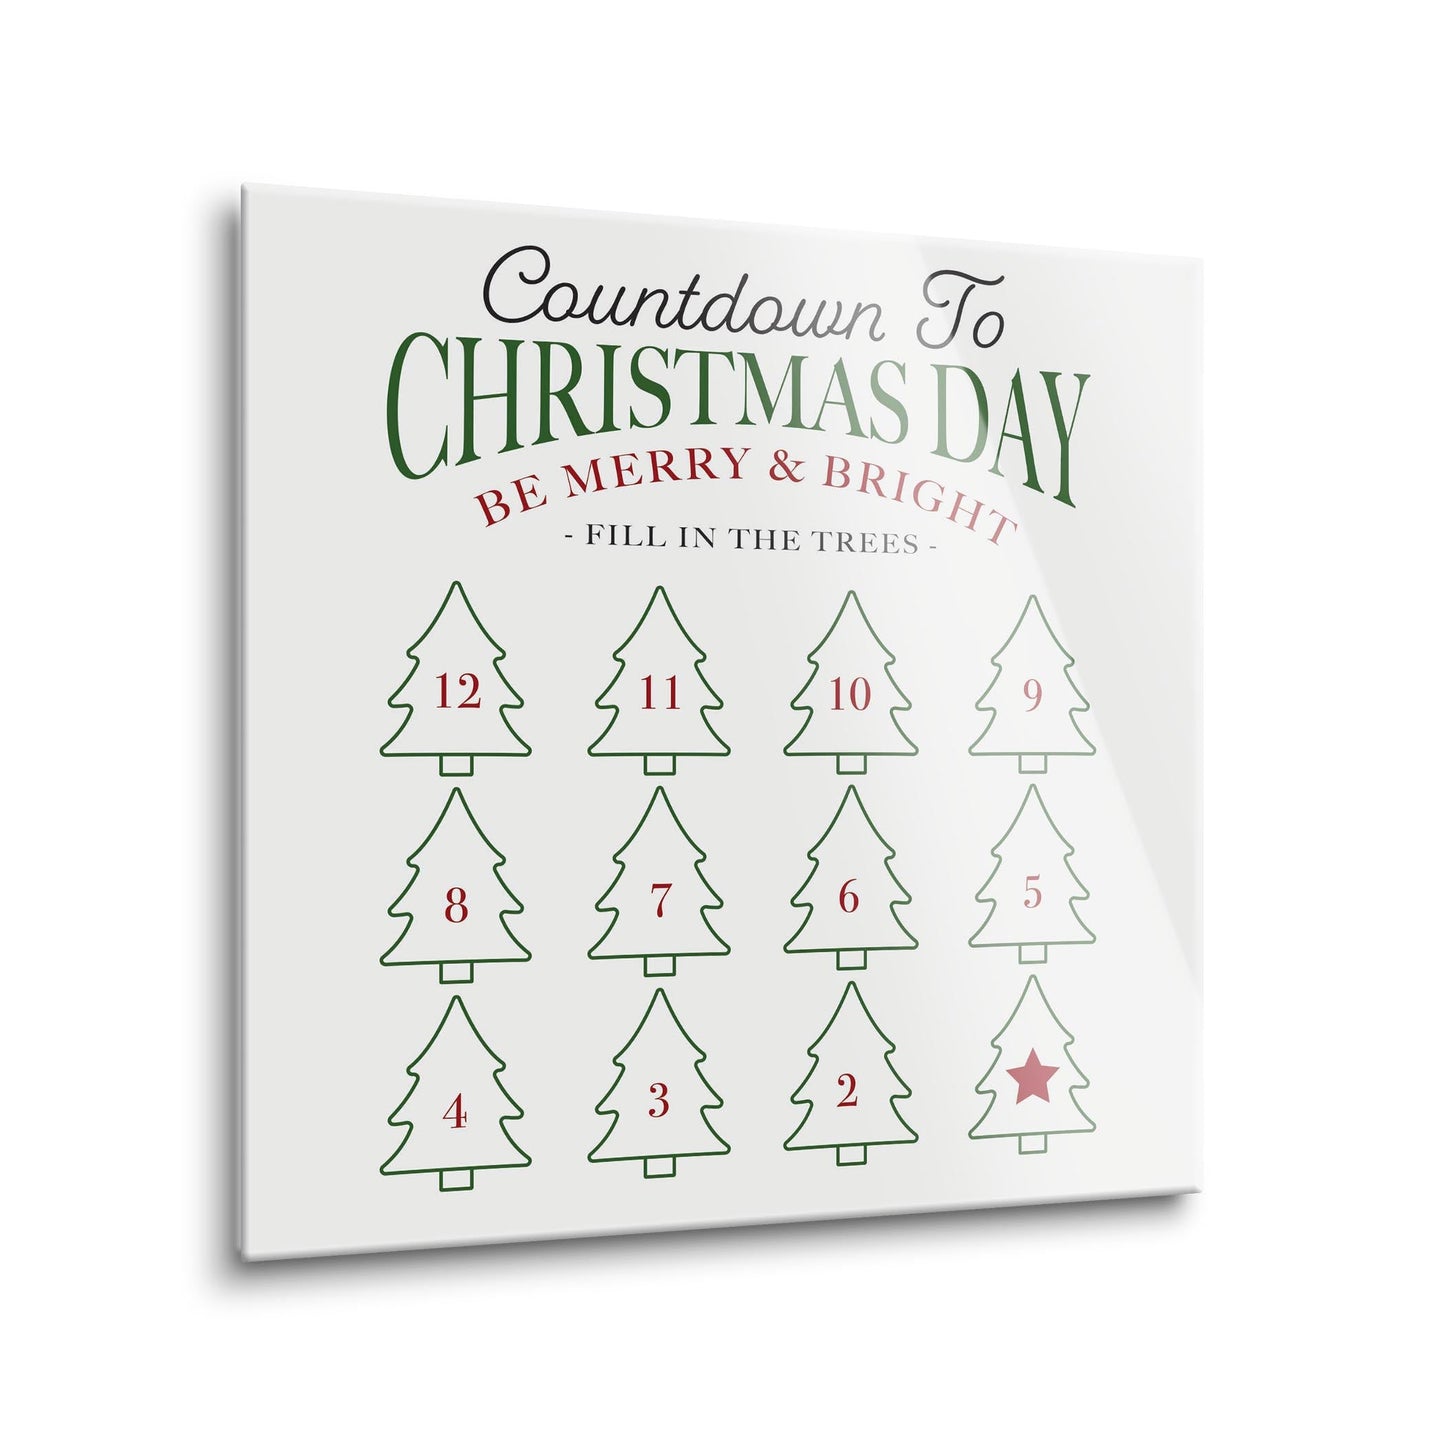 Countdown to Christmas Day Trees | 12x12